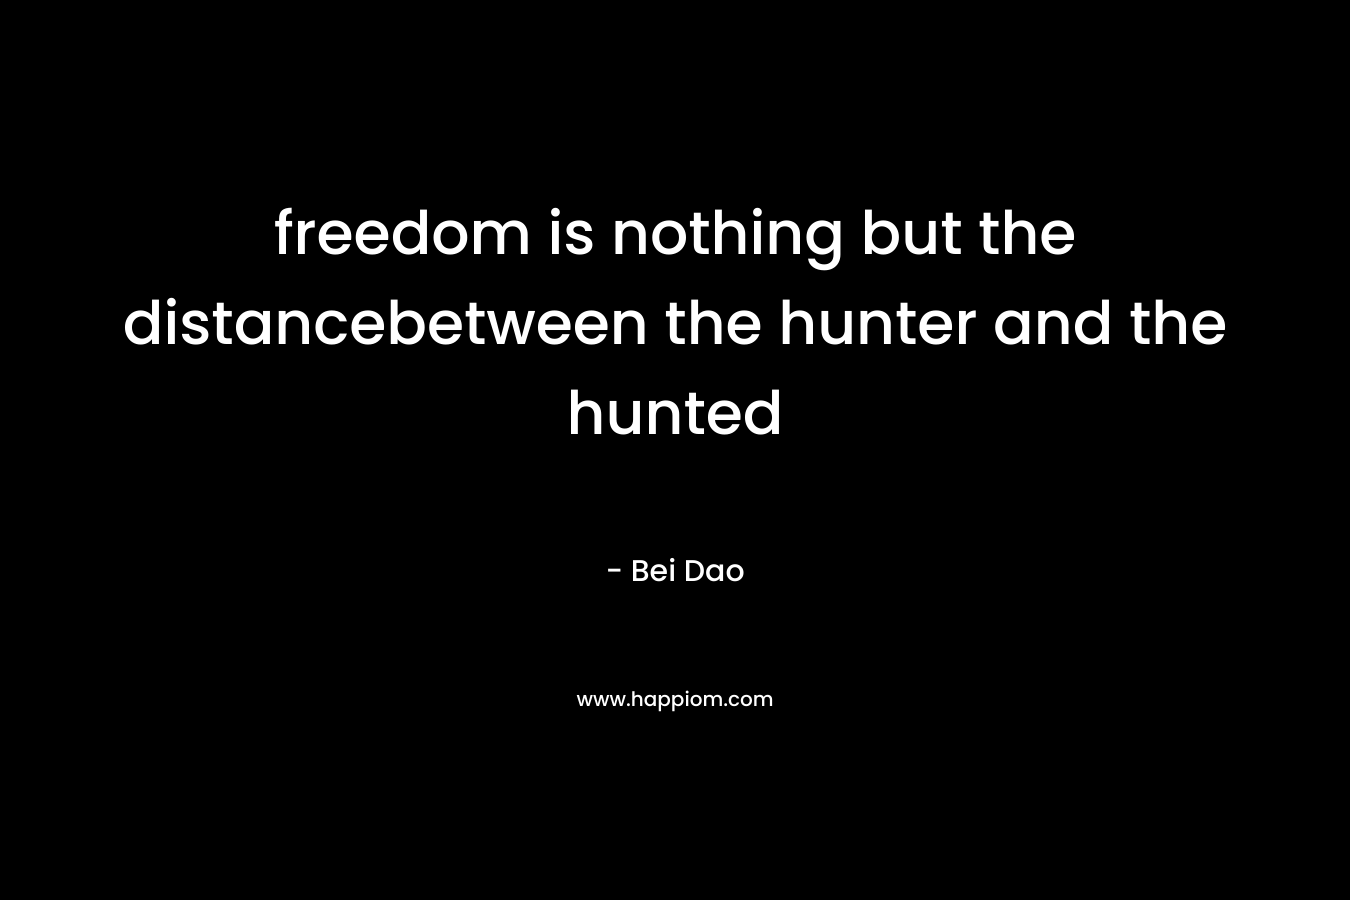 freedom is nothing but the distancebetween the hunter and the hunted – Bei Dao